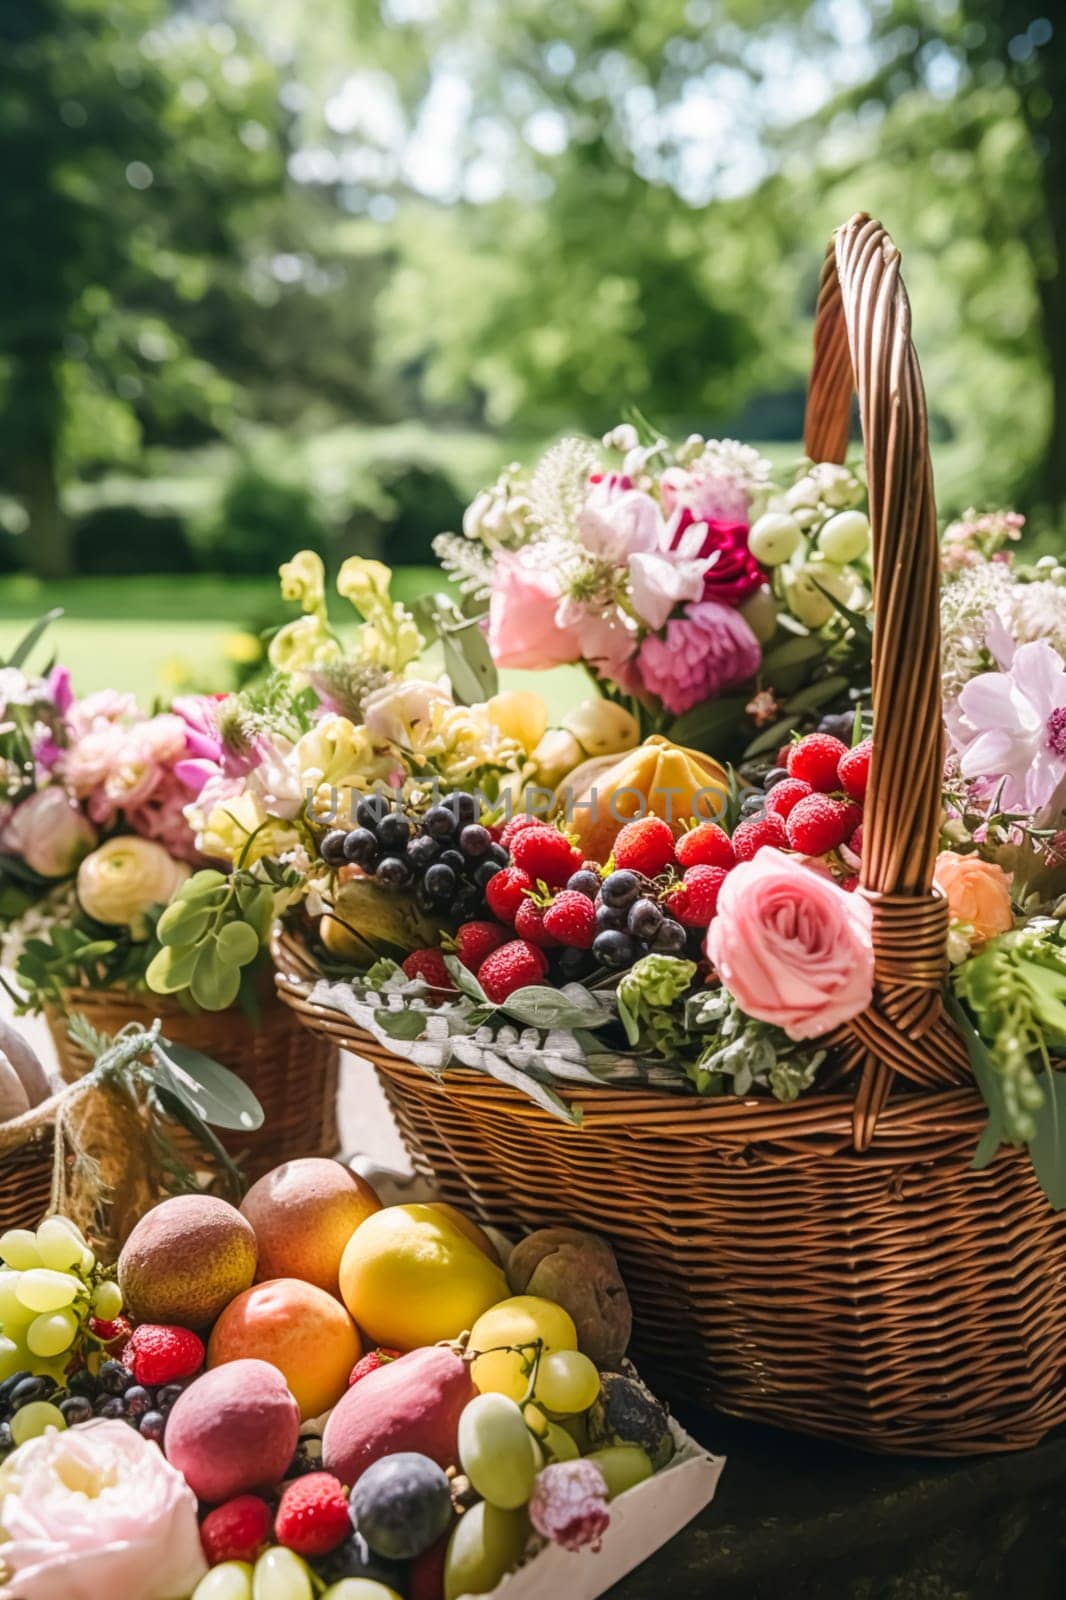 Summer garden harvest, farmers market and country buffet table, cakes and desserts in wicker basket in the garden, food catering for wedding and holiday celebration, floral decor idea